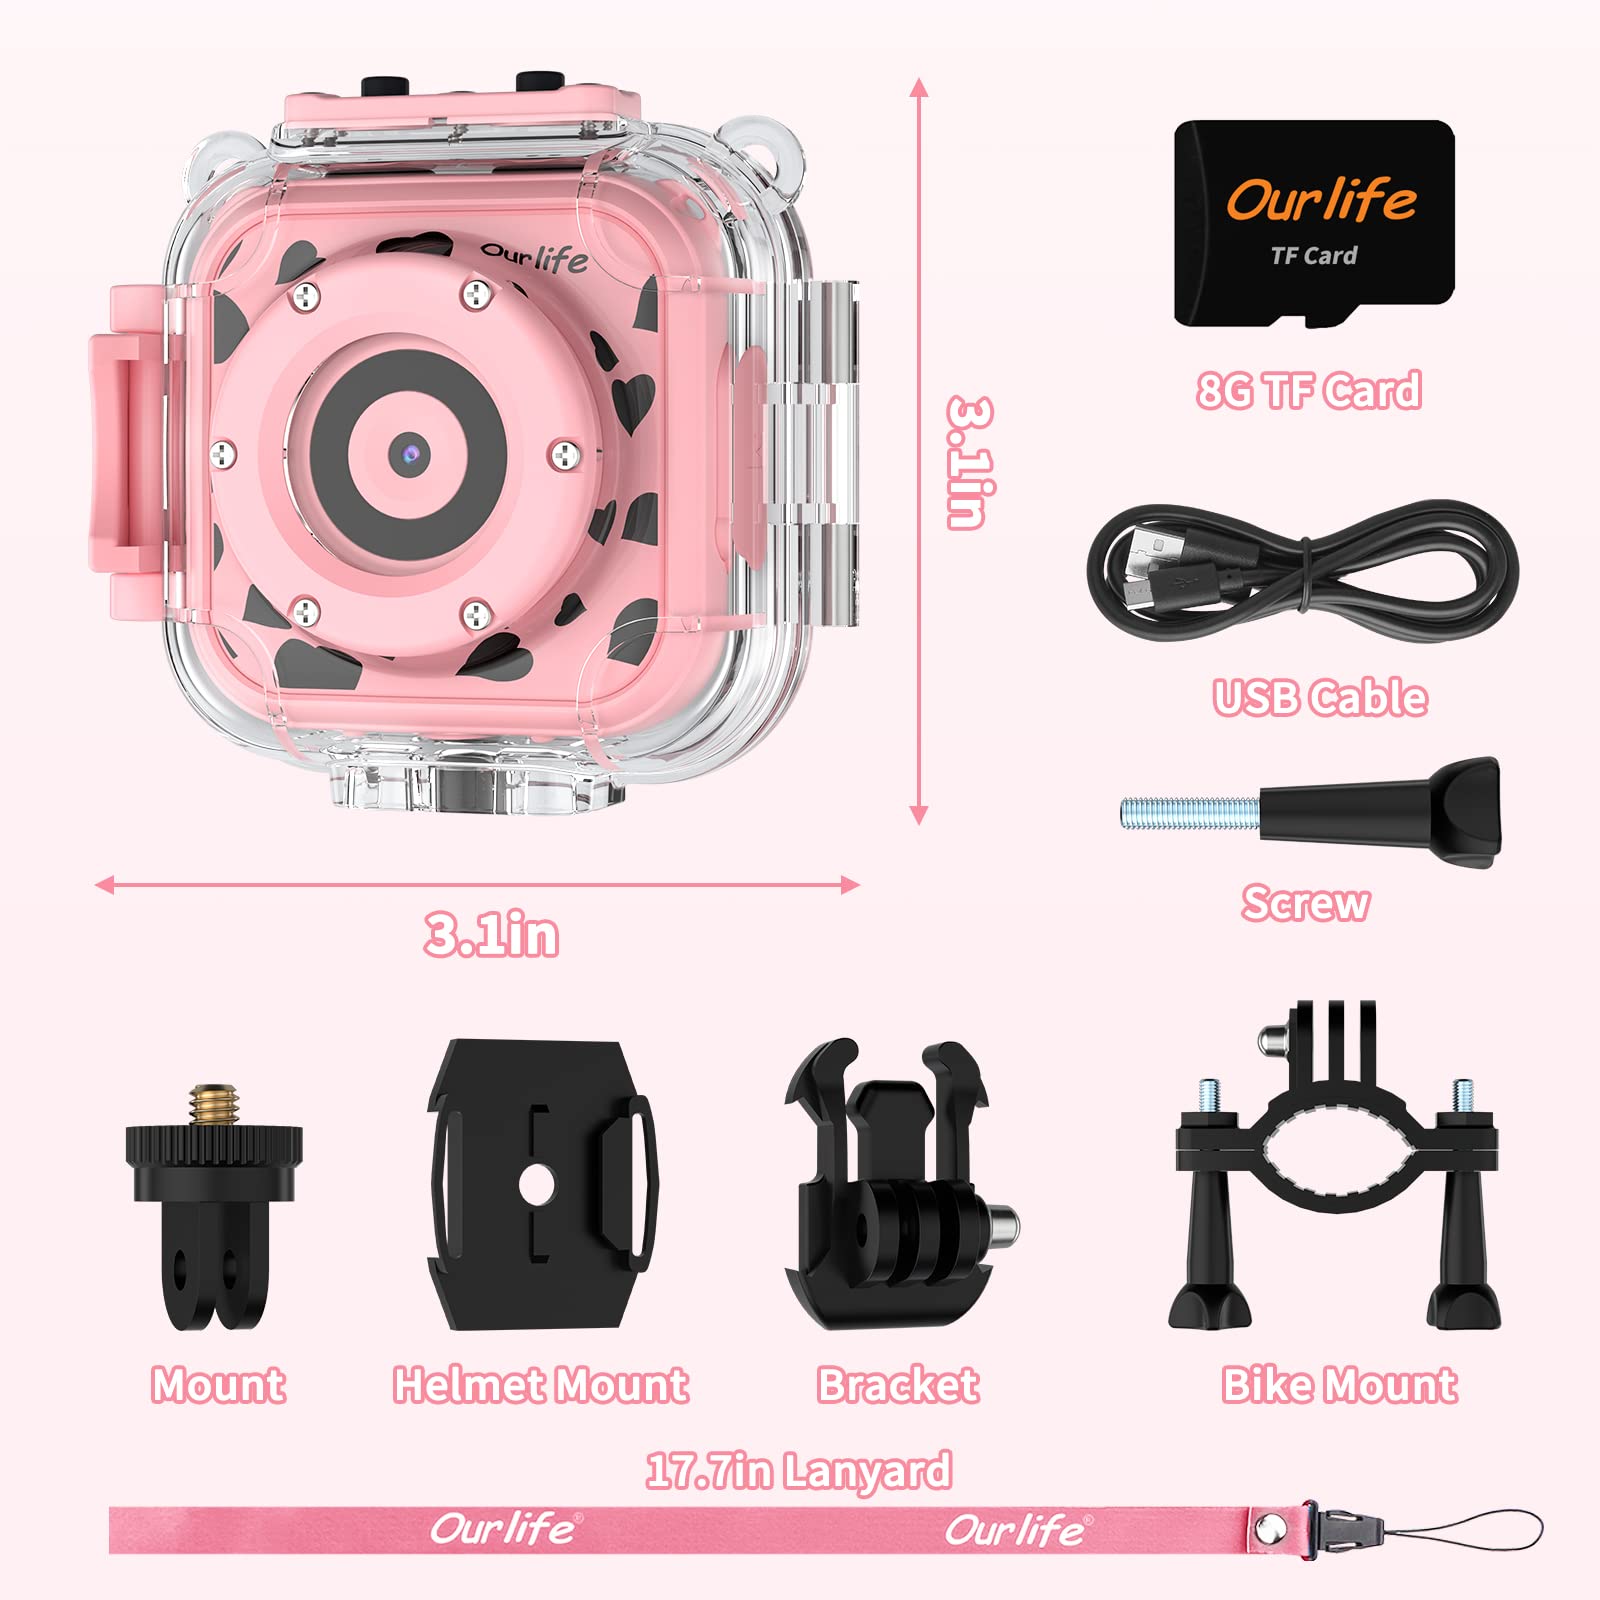 Ourlife Waterproof Camera for Kids, 1080P HD Kids Digital Action Camera Underwater Camera with 8GB SD Card, Birthday Gift Toys for Girls Age 3-14